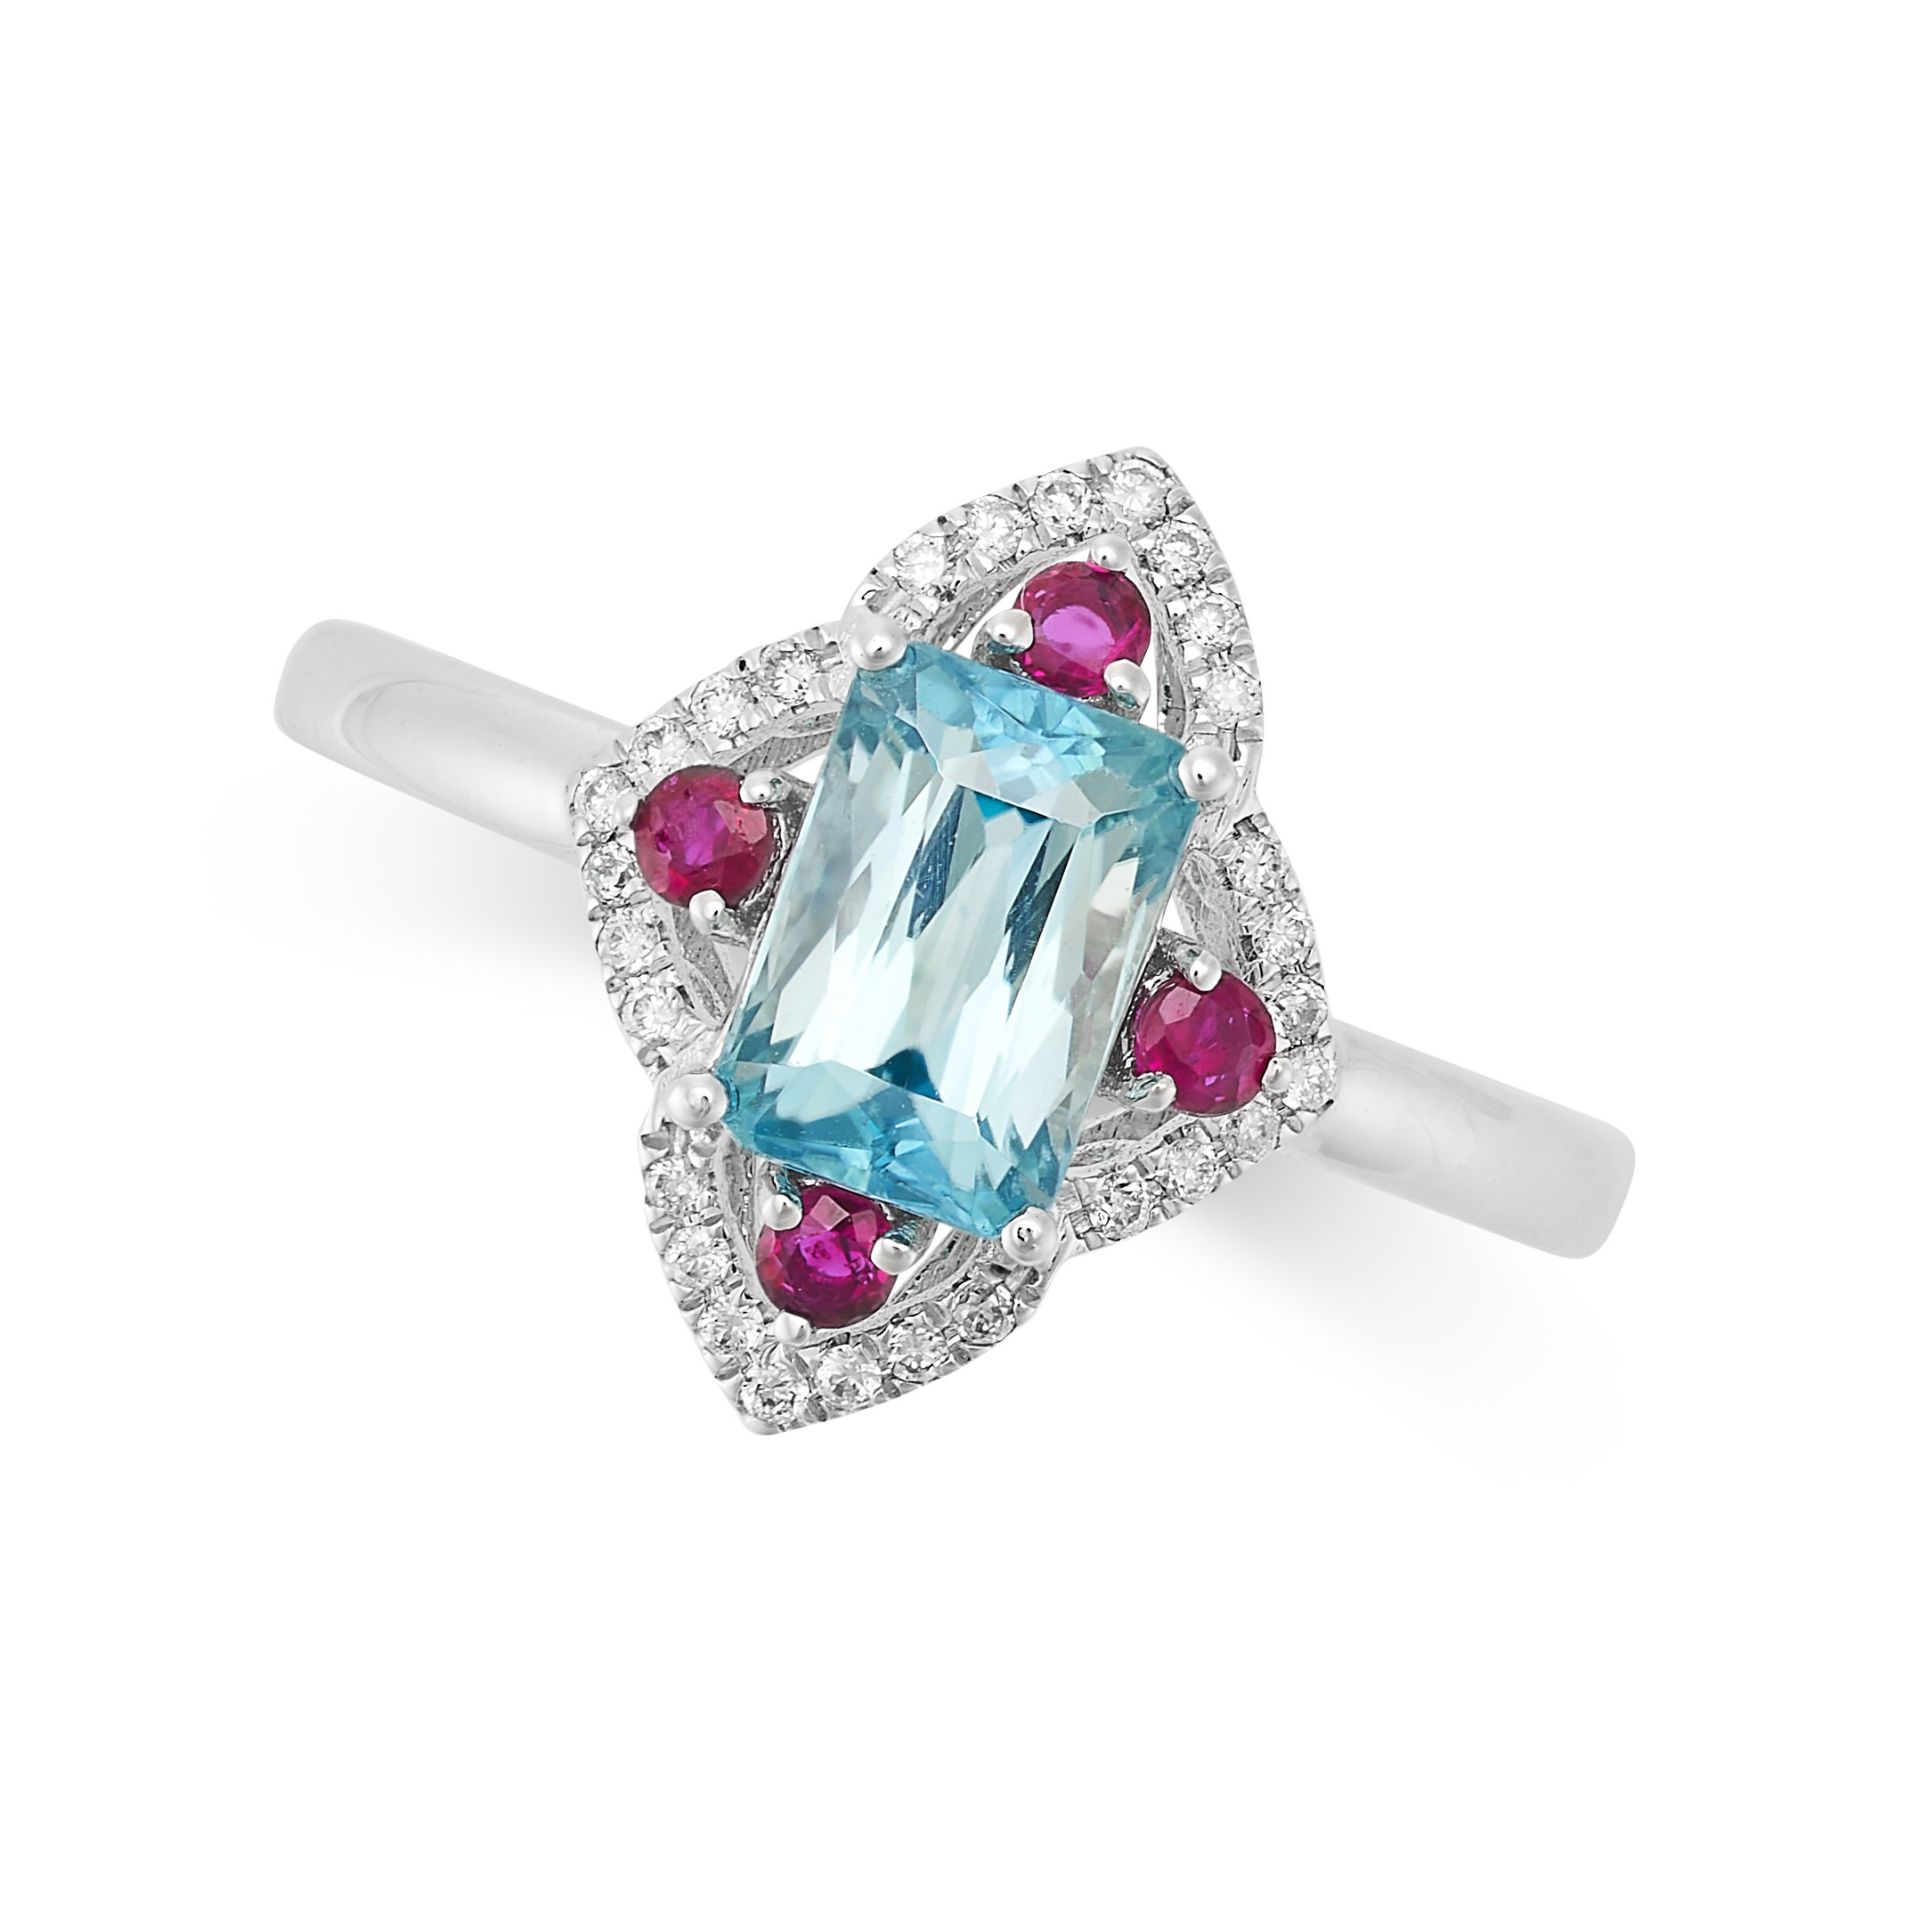 A BLUE ZIRCON, RUBY AND DIAMOND RING in 14ct white gold, set with a central mixed cut zircon of 1.89